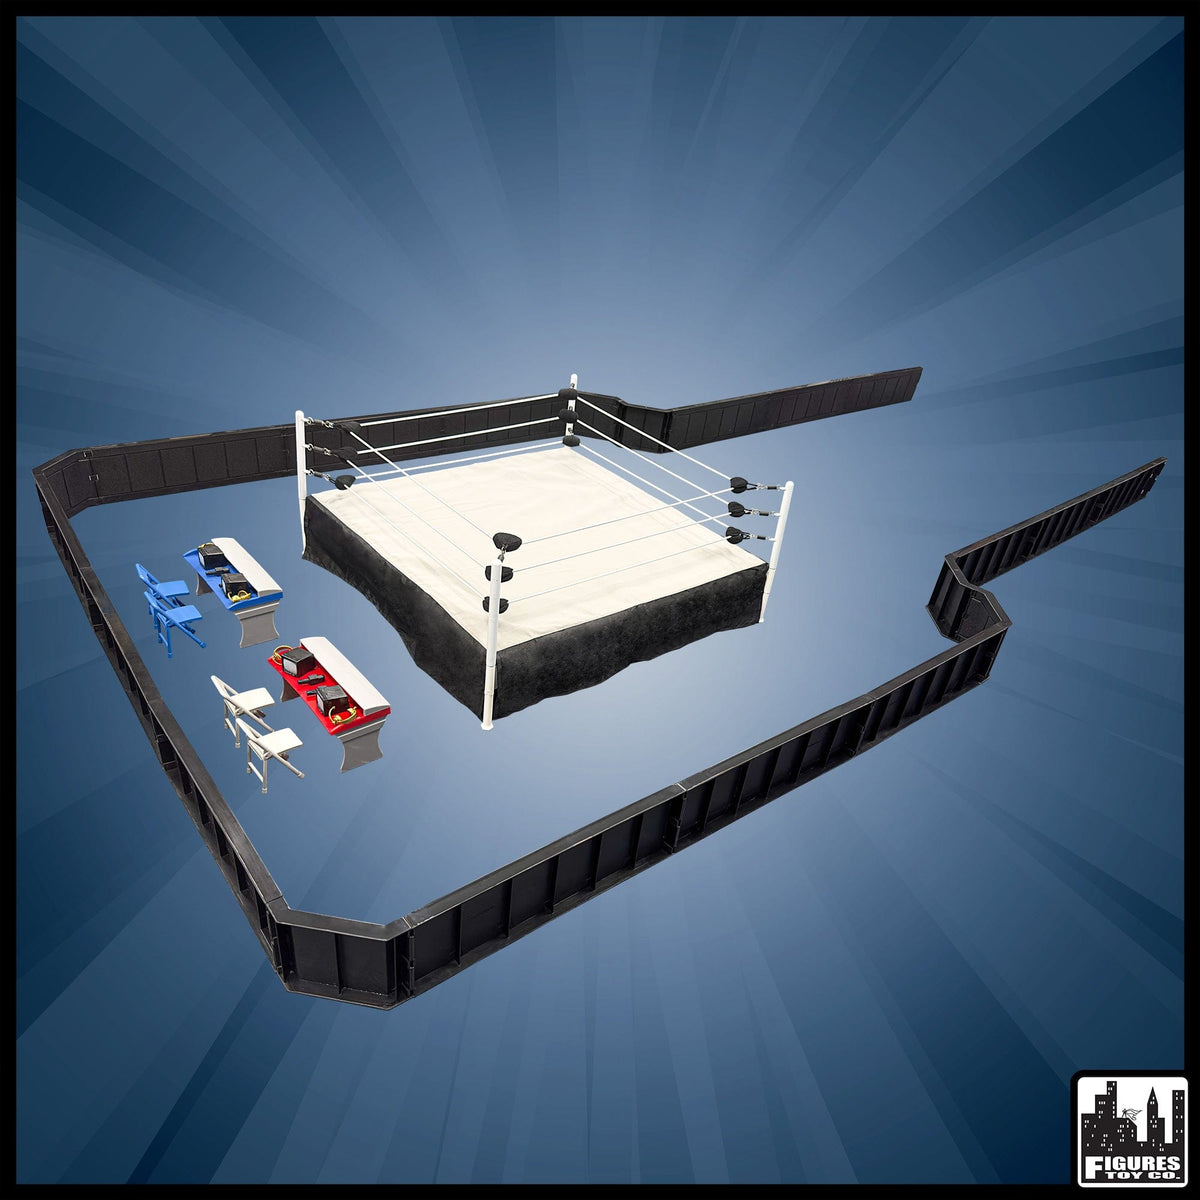 Ultimate Wrestling Ring Deluxe Playset With Barricade, Ring &amp; Commentators Tables for WWE Wrestling Figures